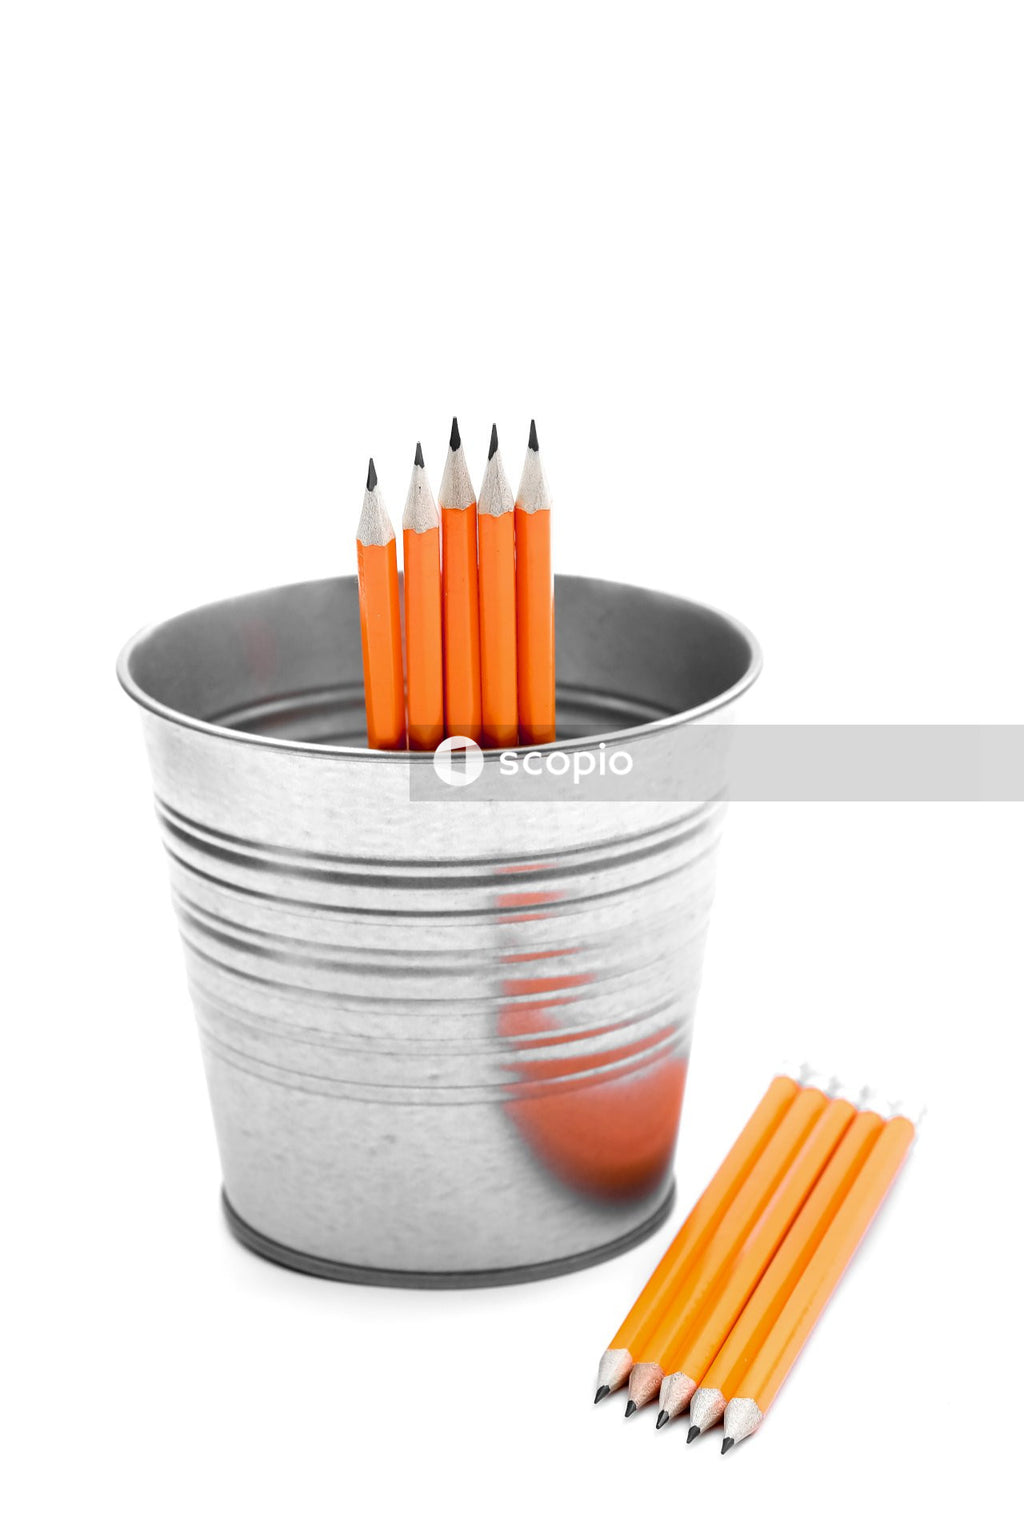 Blue and orange pencils in gray cup